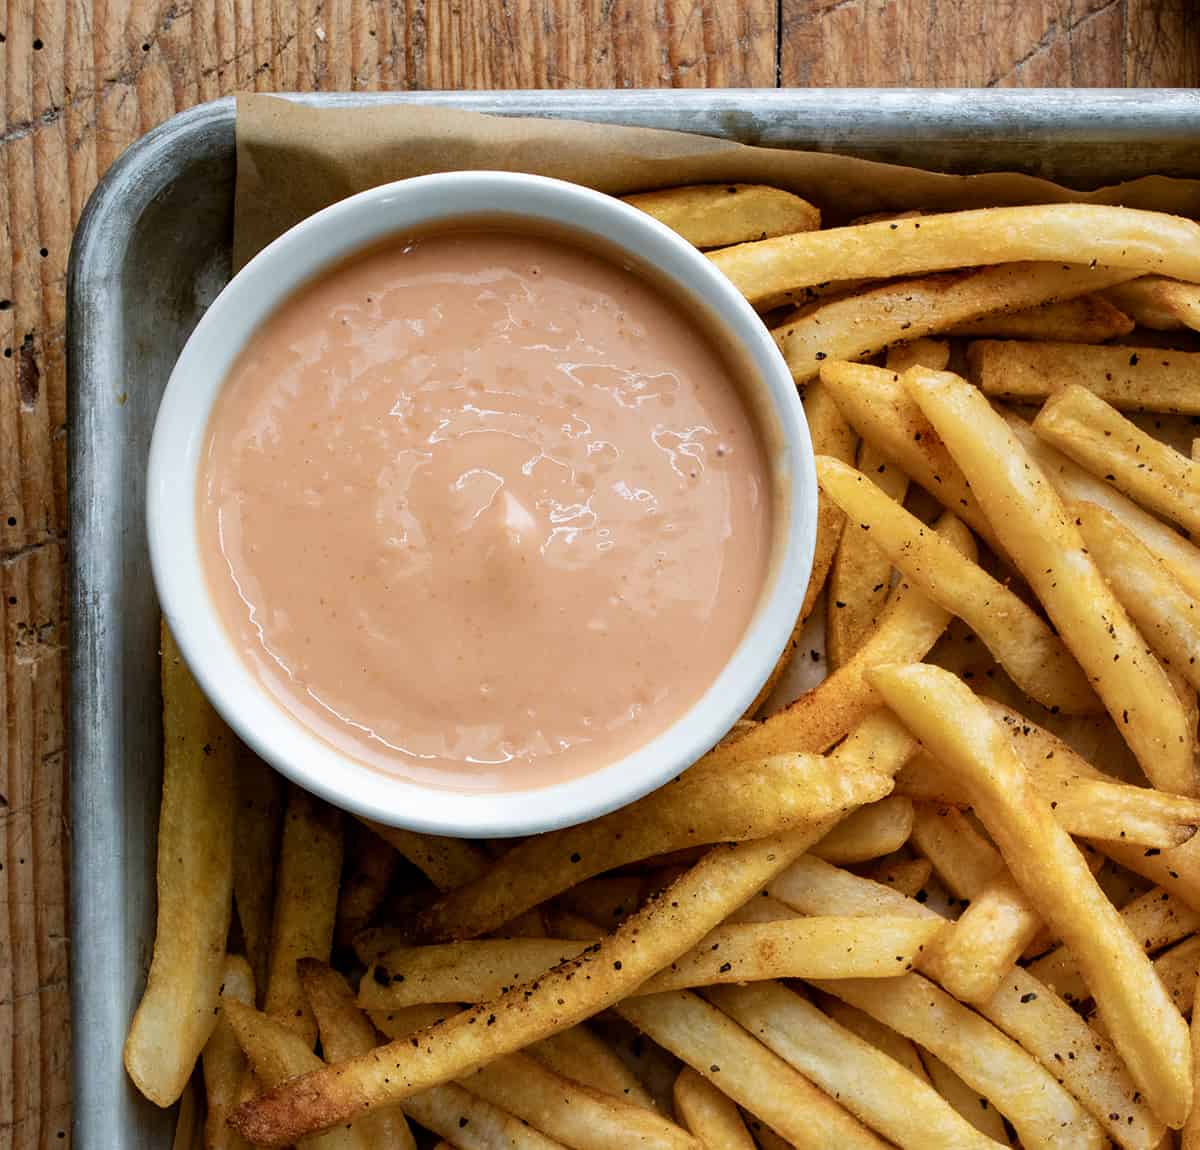 Bowl of Easy Fry Sauce in a Platter with French Fries.